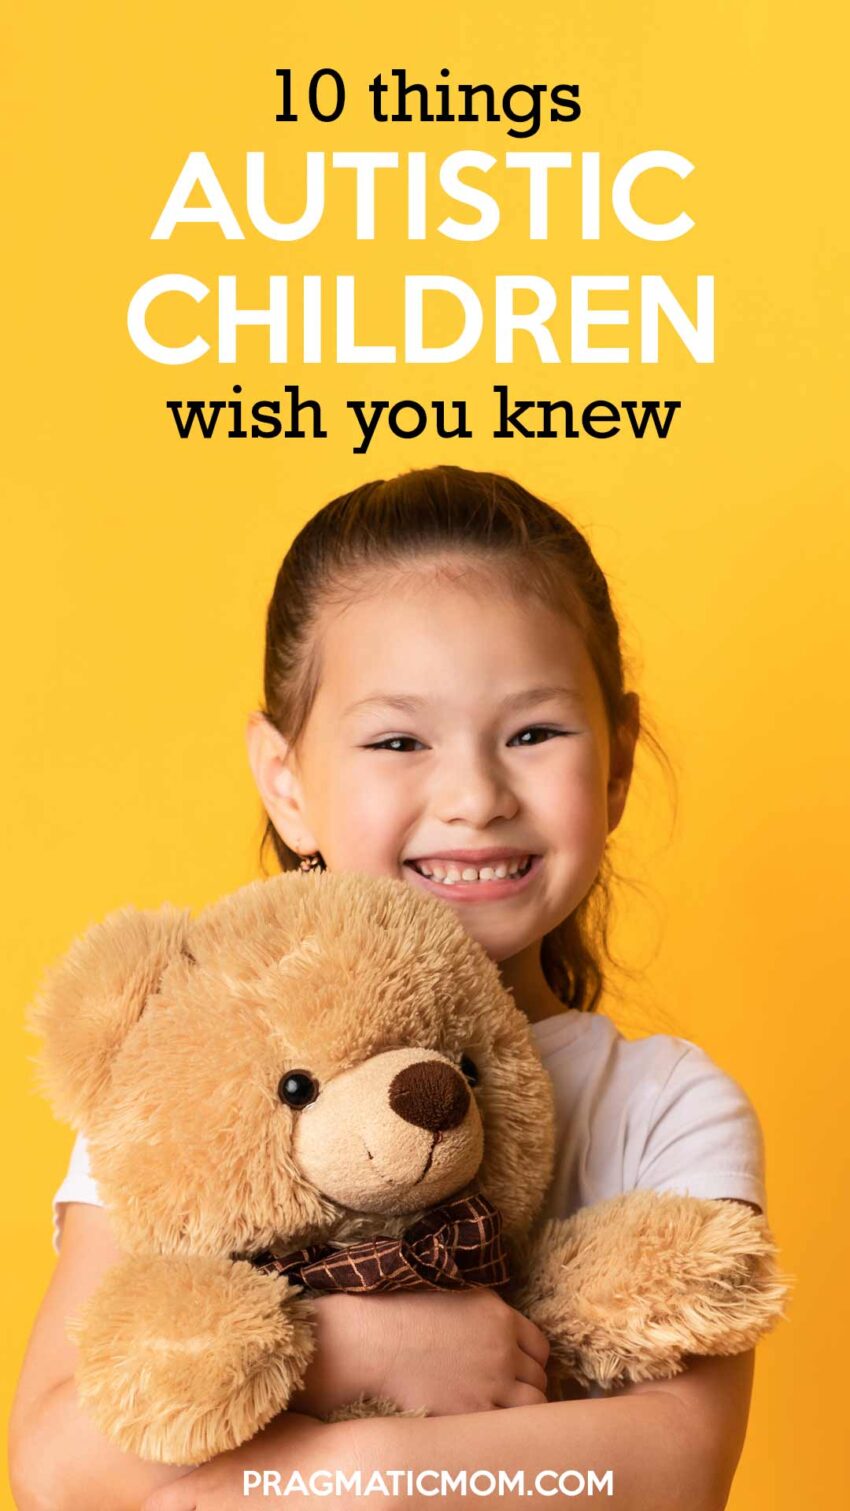 10 Things Autistic Children Wish You Knew